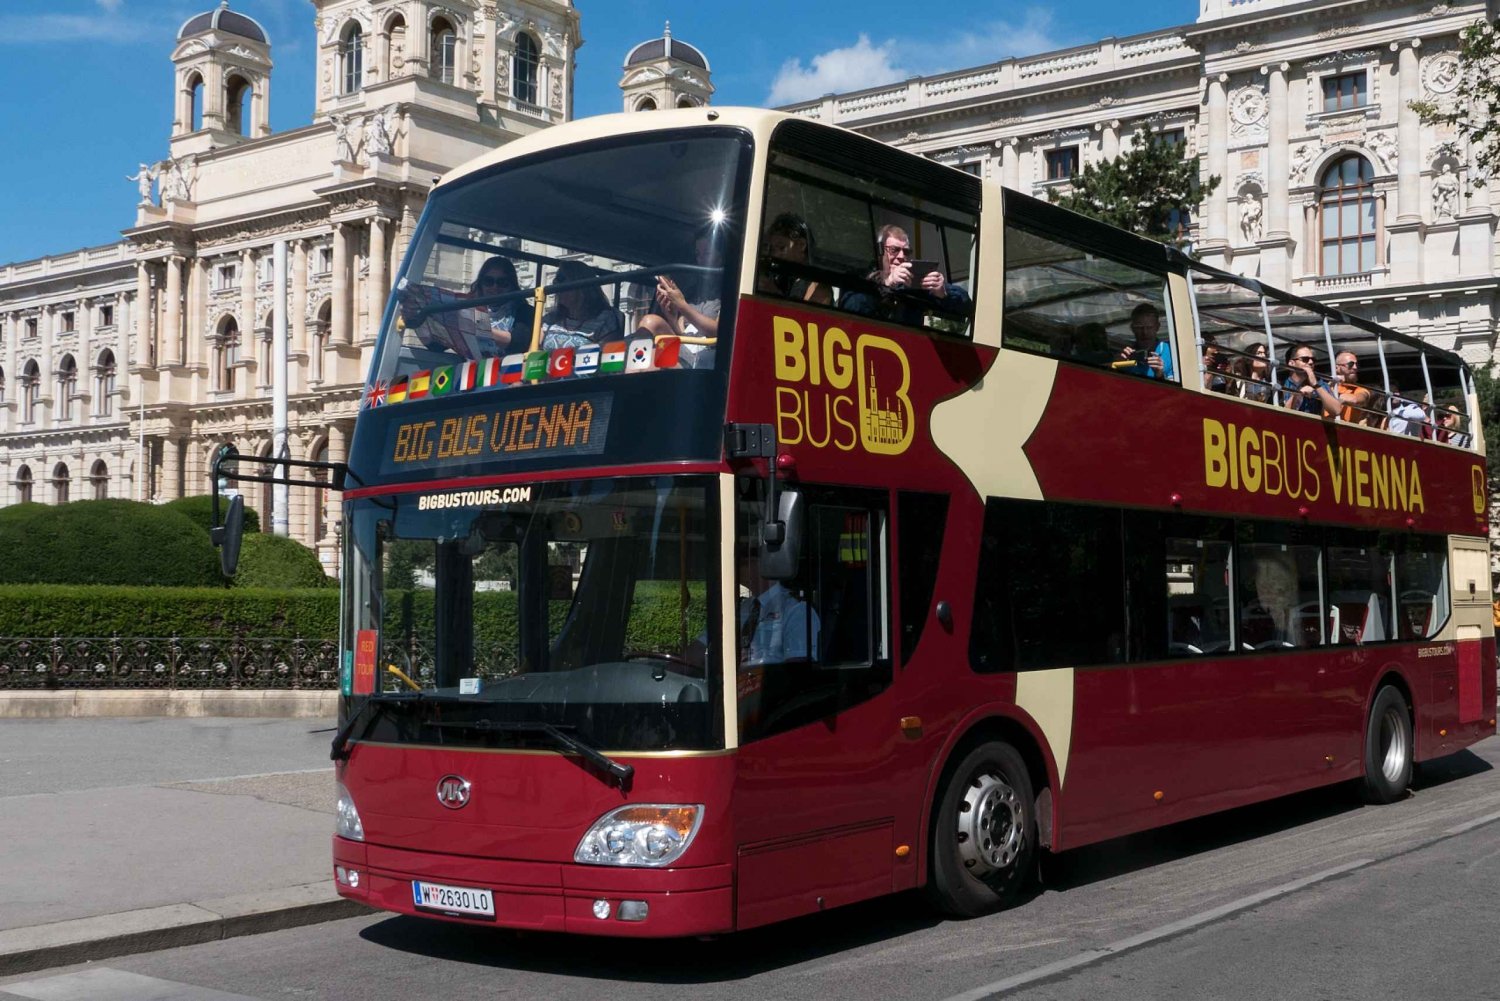 Vienna: Hop-On Hop-Off Sightseeing Bus Tour & Cruise Option